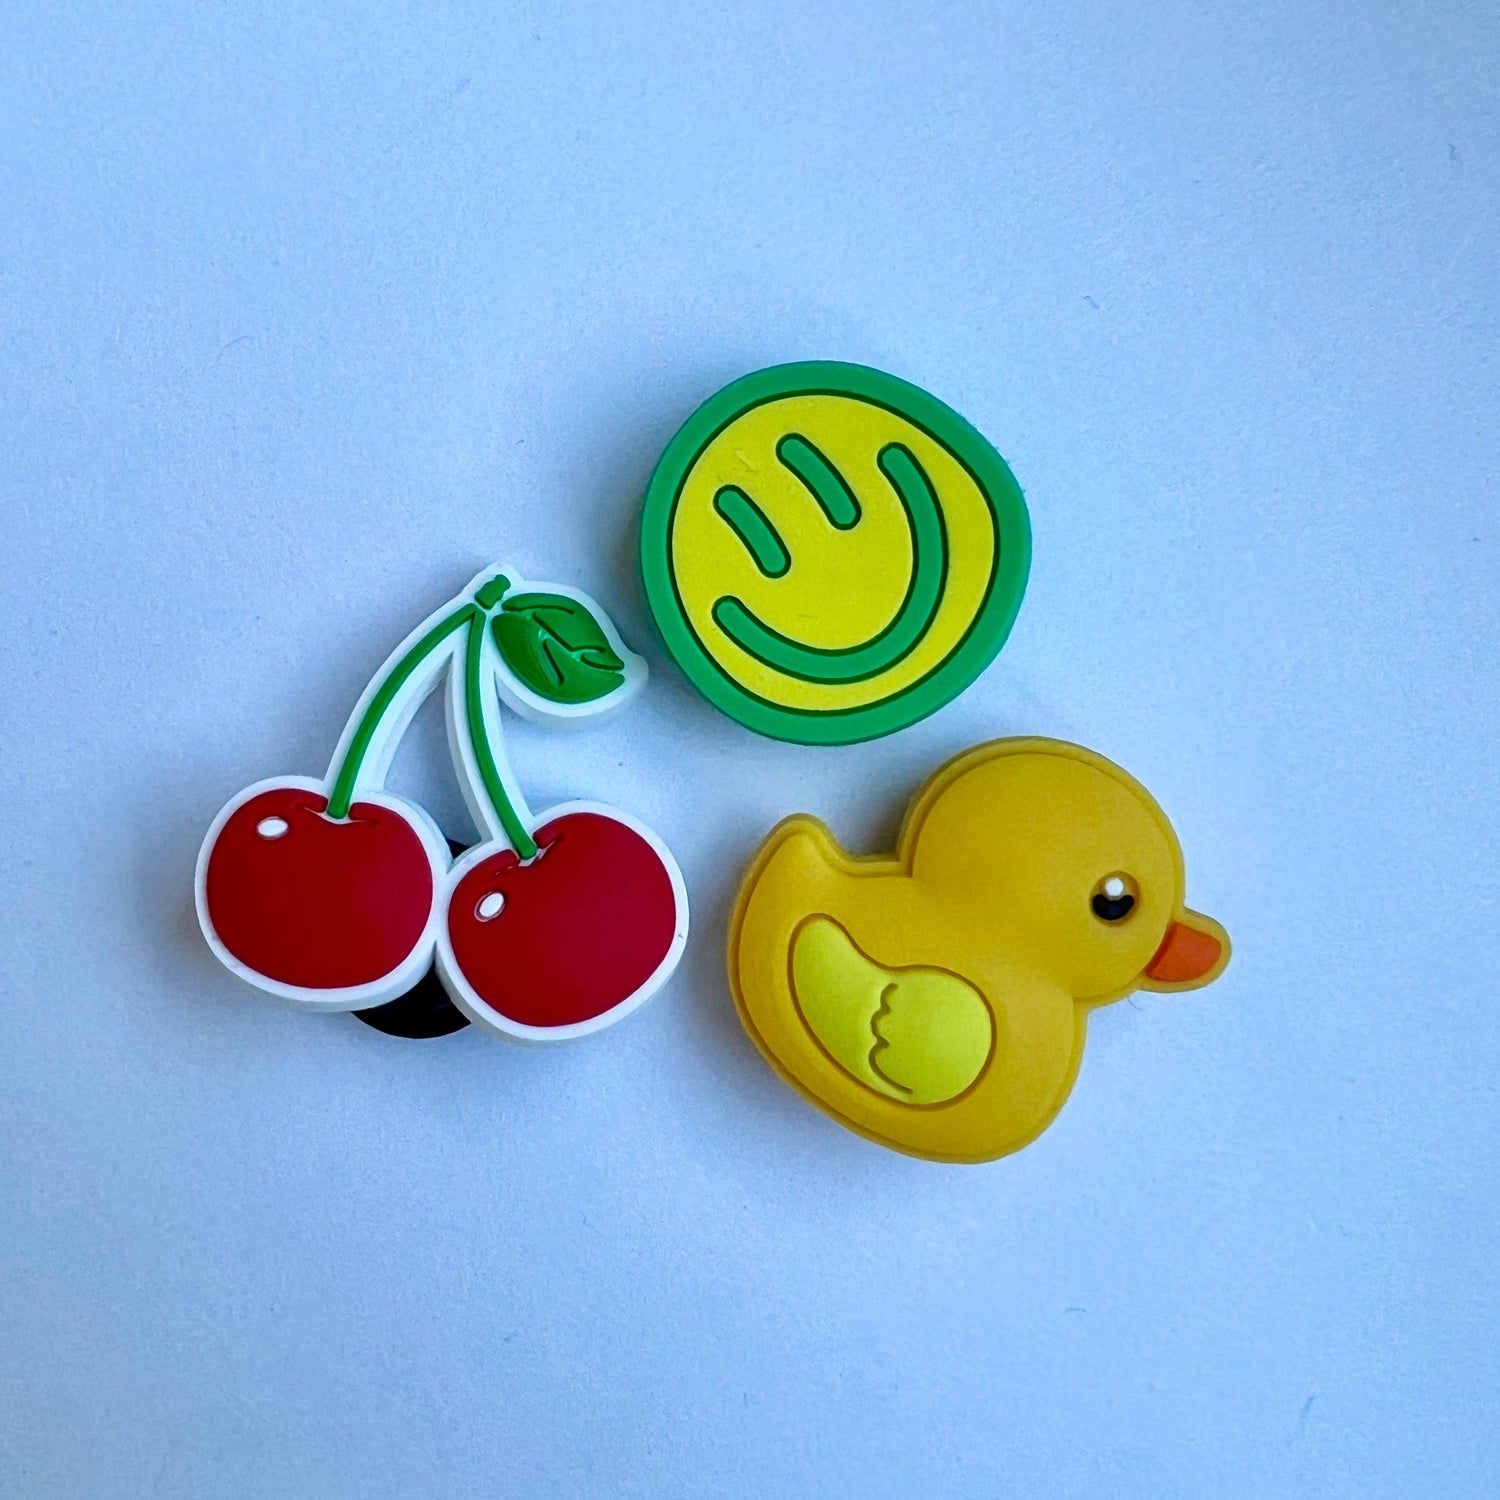 The Rubber Ducky Charms Pack